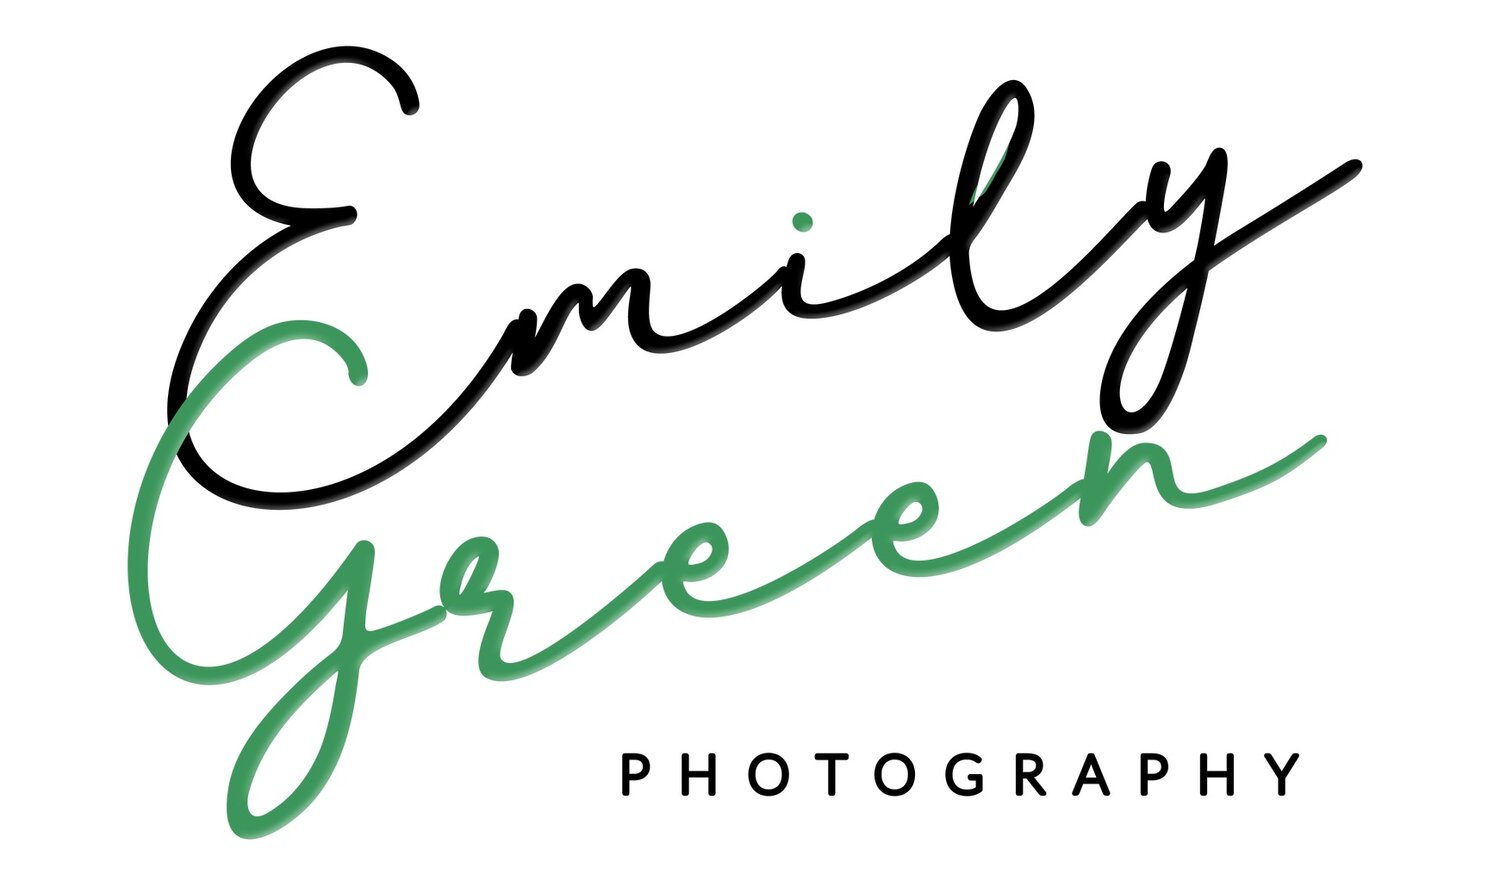 Emily Green Photography